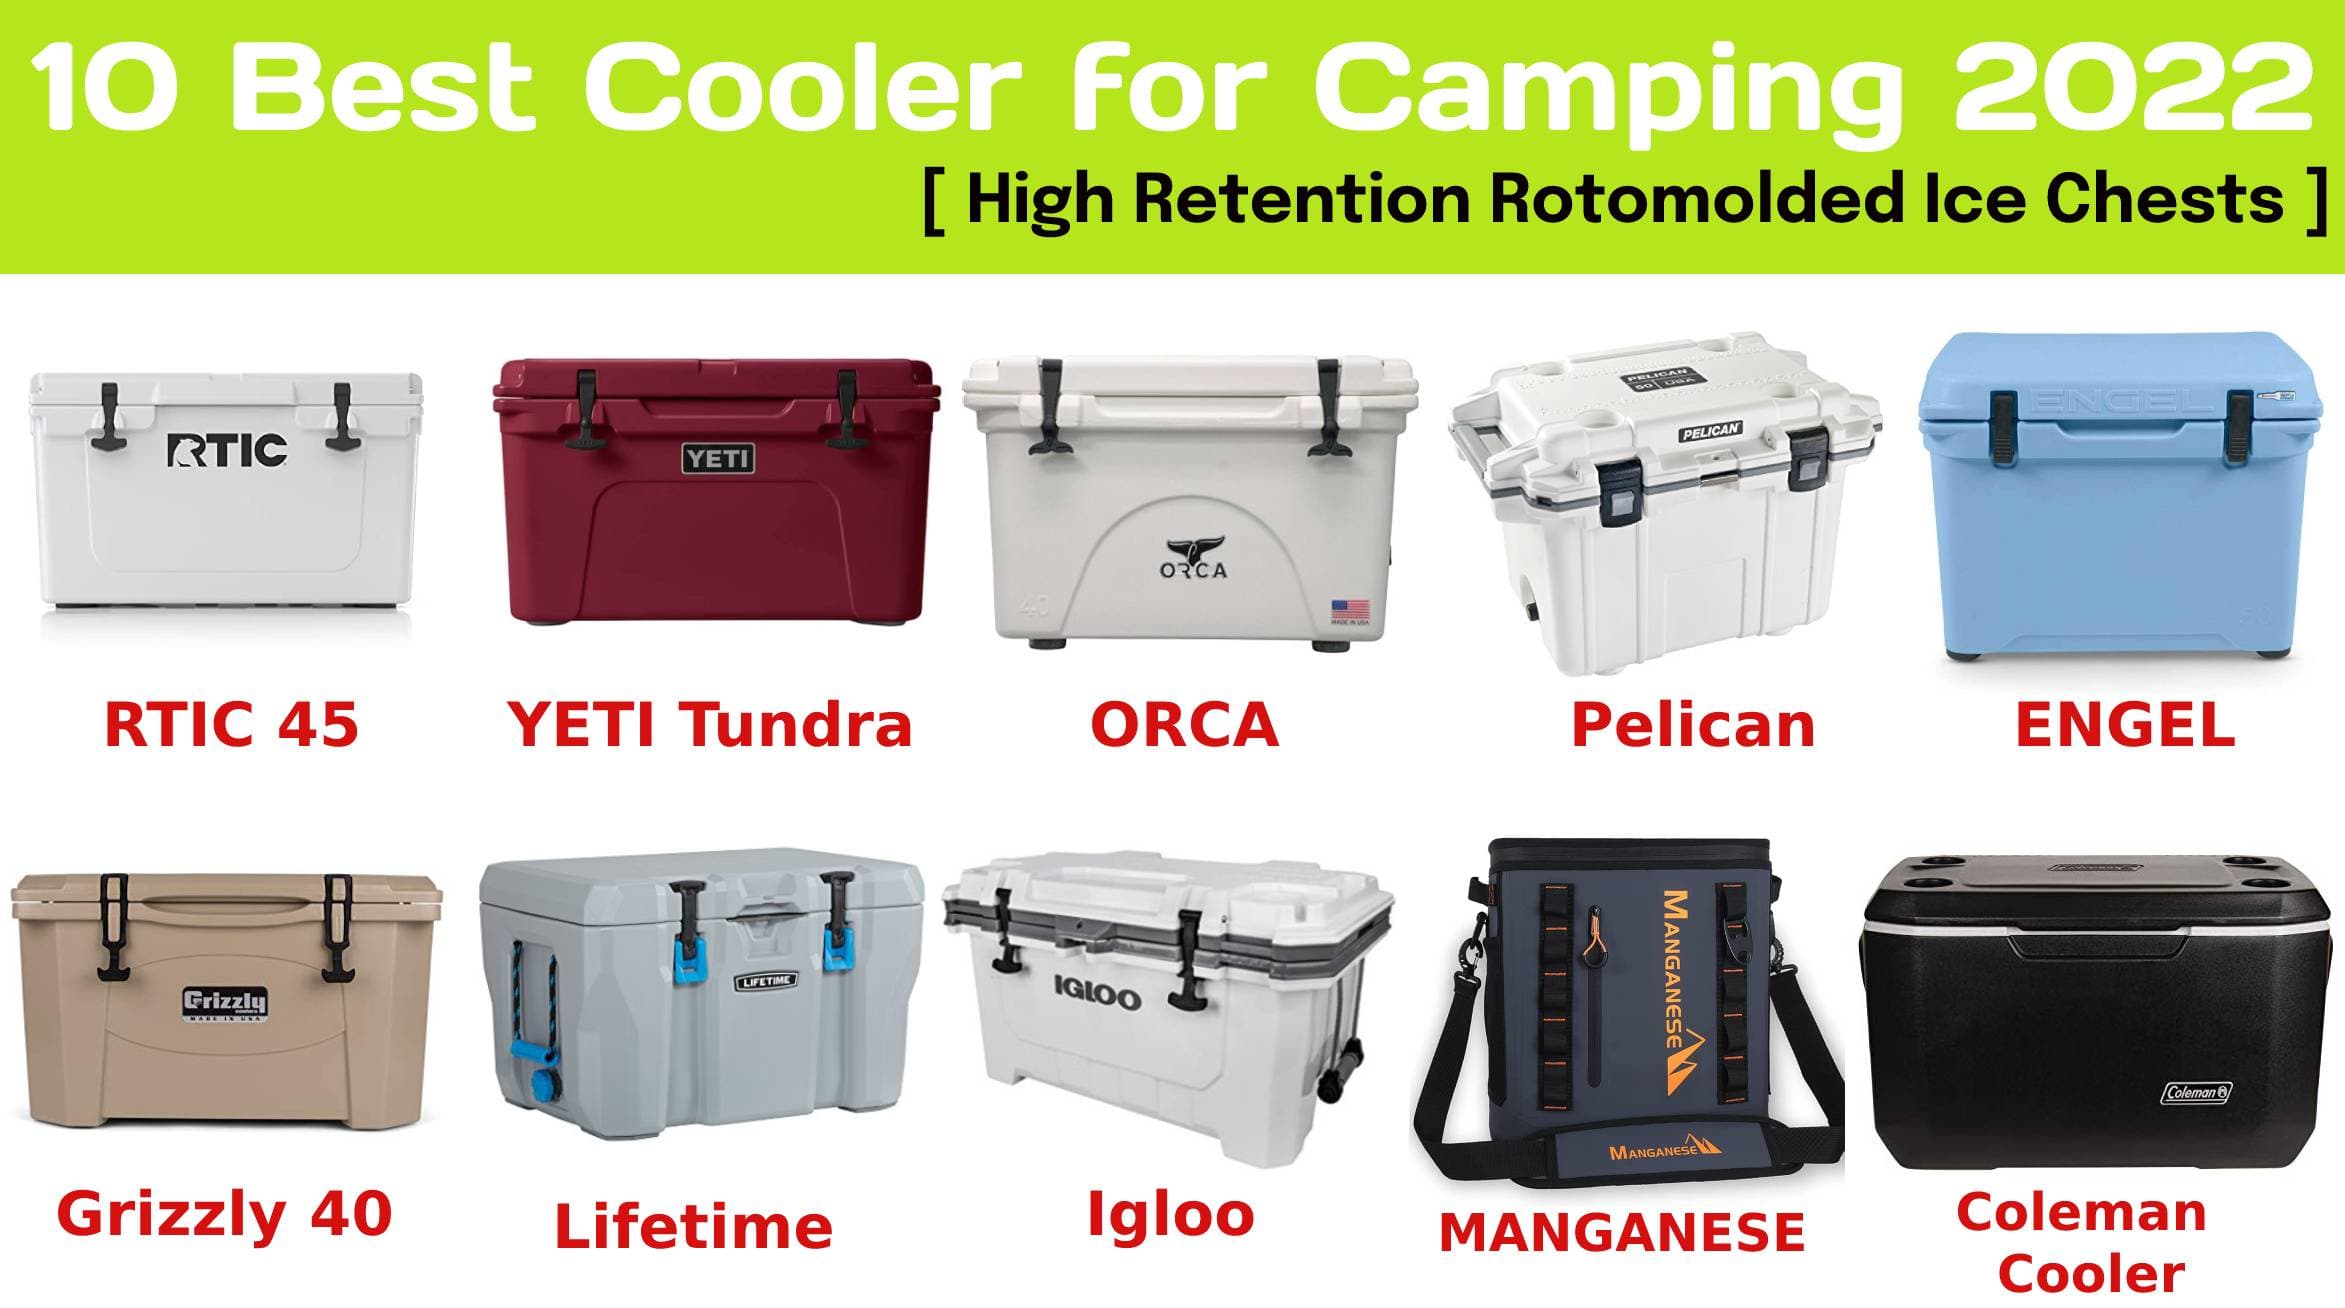 10 Best Cooler for Camping 2022: High Retention Rotomolded Ice Chests Review for Camping, RV, Outdoor Boart: Comparison Pelican Elite 50 vs RTIC 45 vs YETI Tundra 45 vs ORCA vs Igloo vs Lifetime vs Grizzly vs Siberian